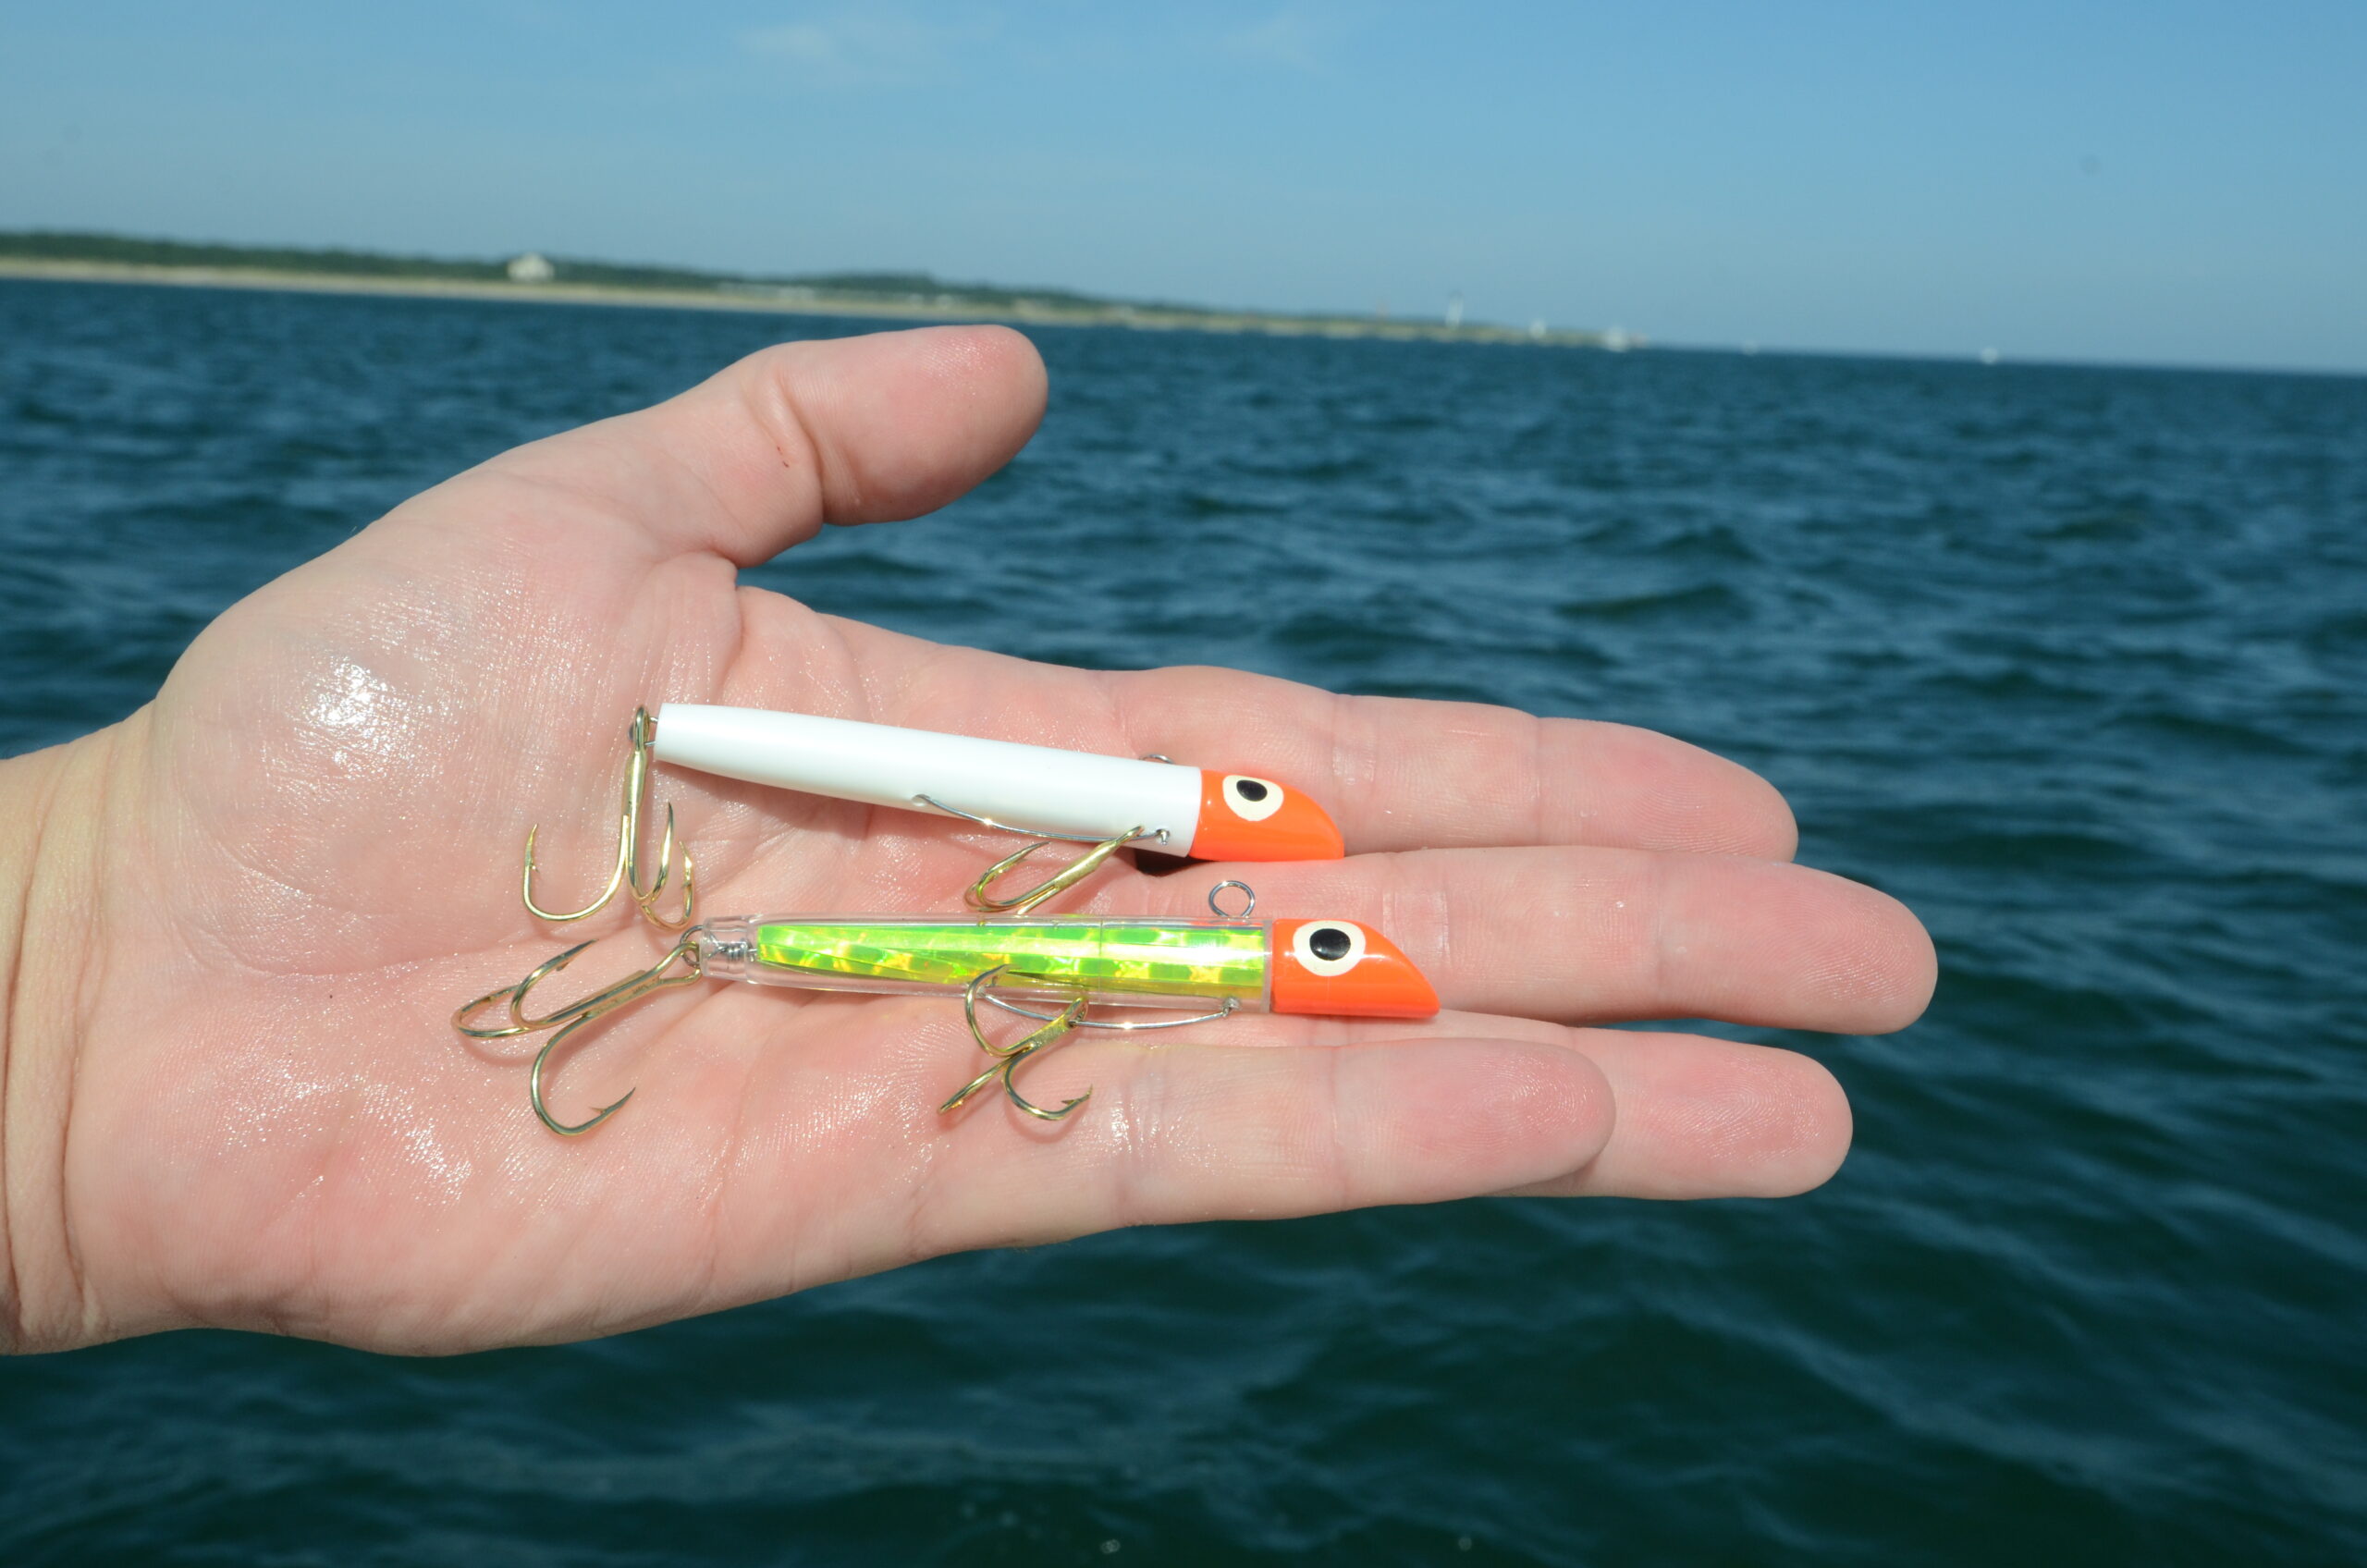 There is no better lure for spanish mackerel than the Got-Cha plug